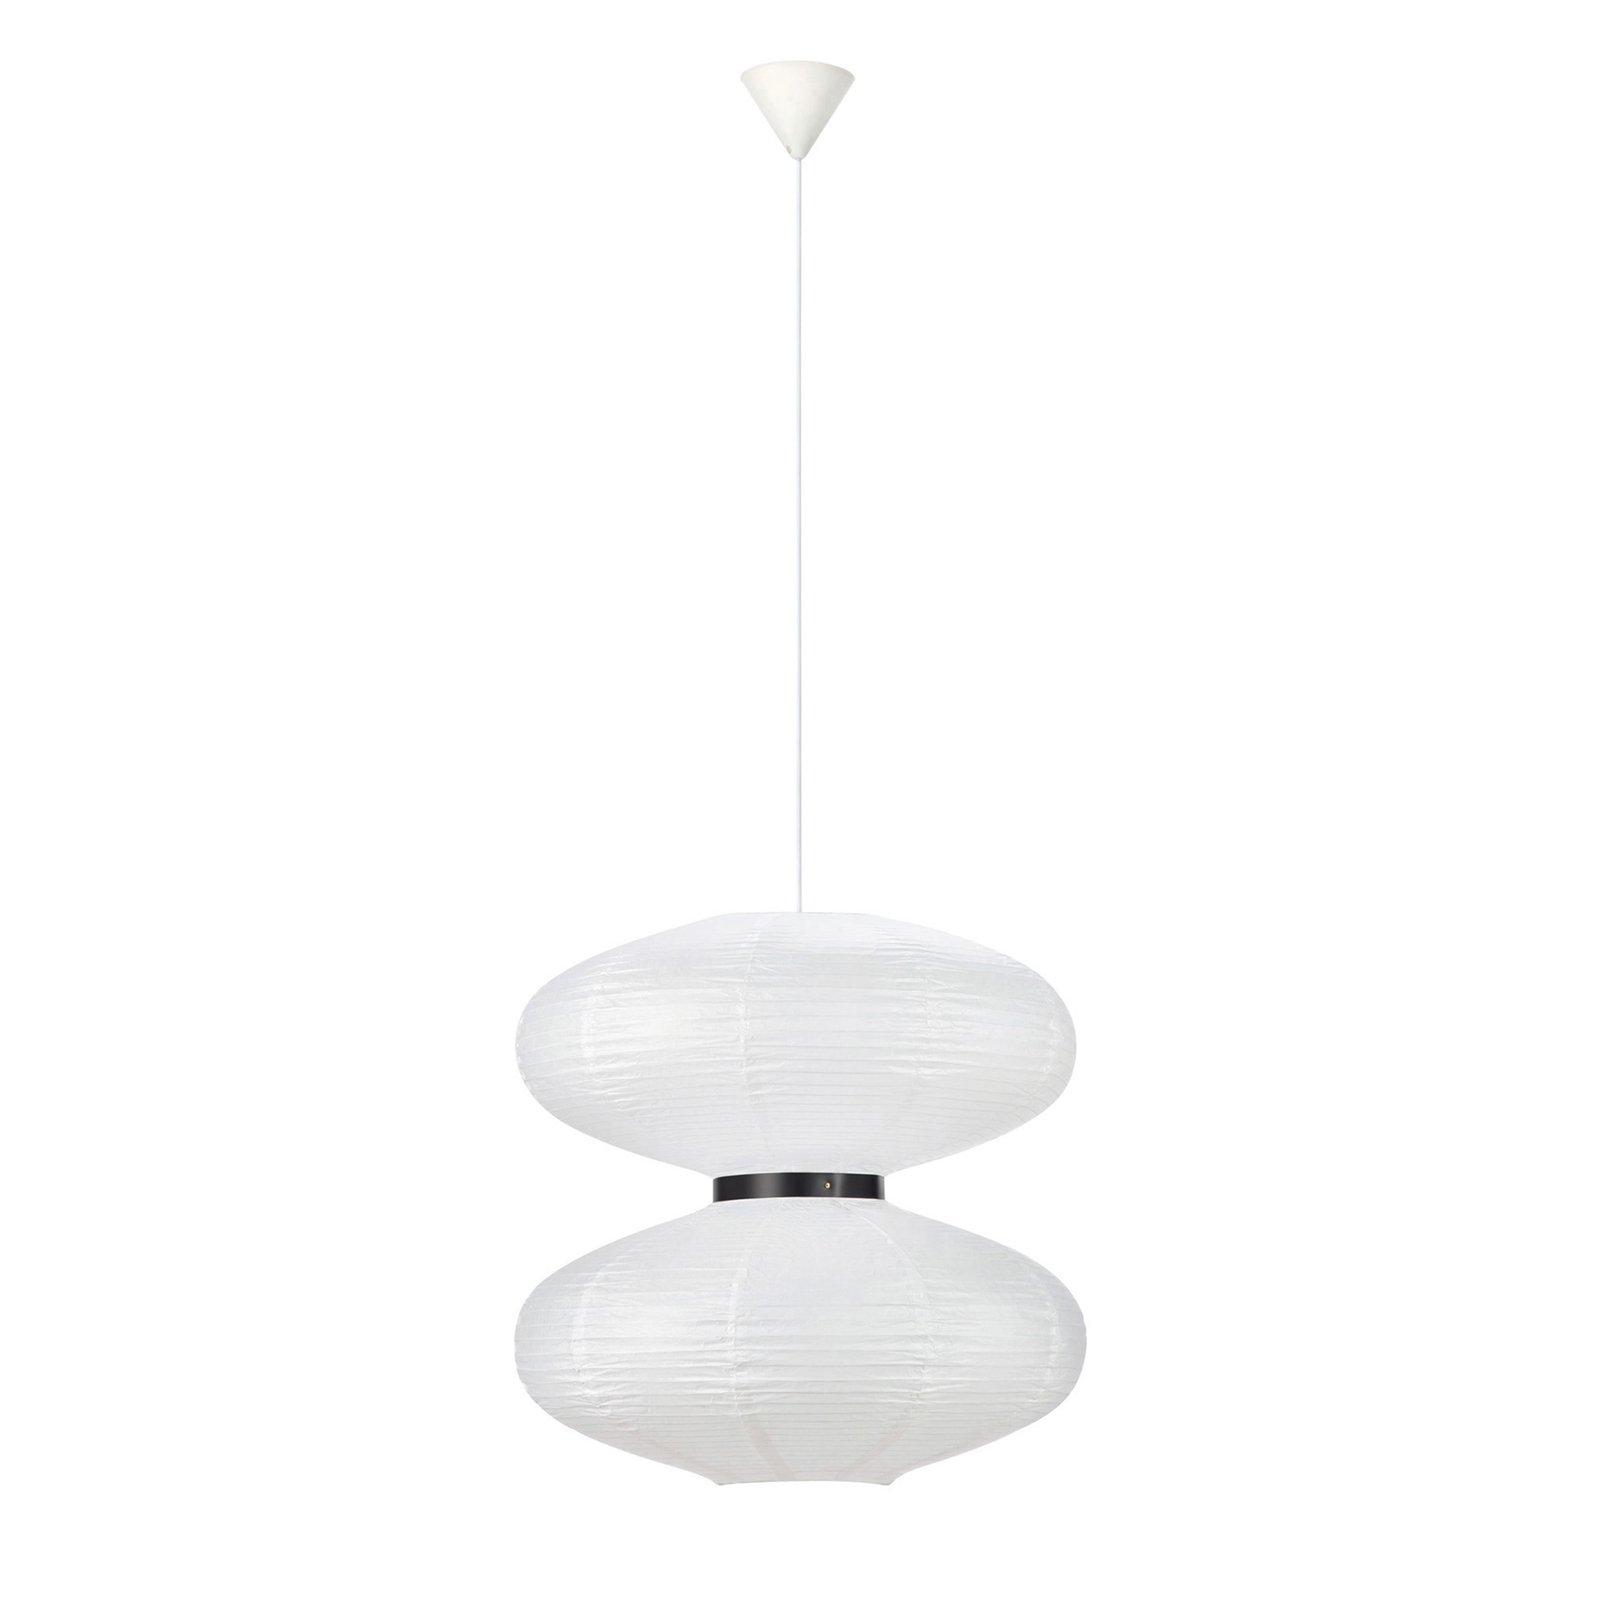 Dual pendant light with white paper shade